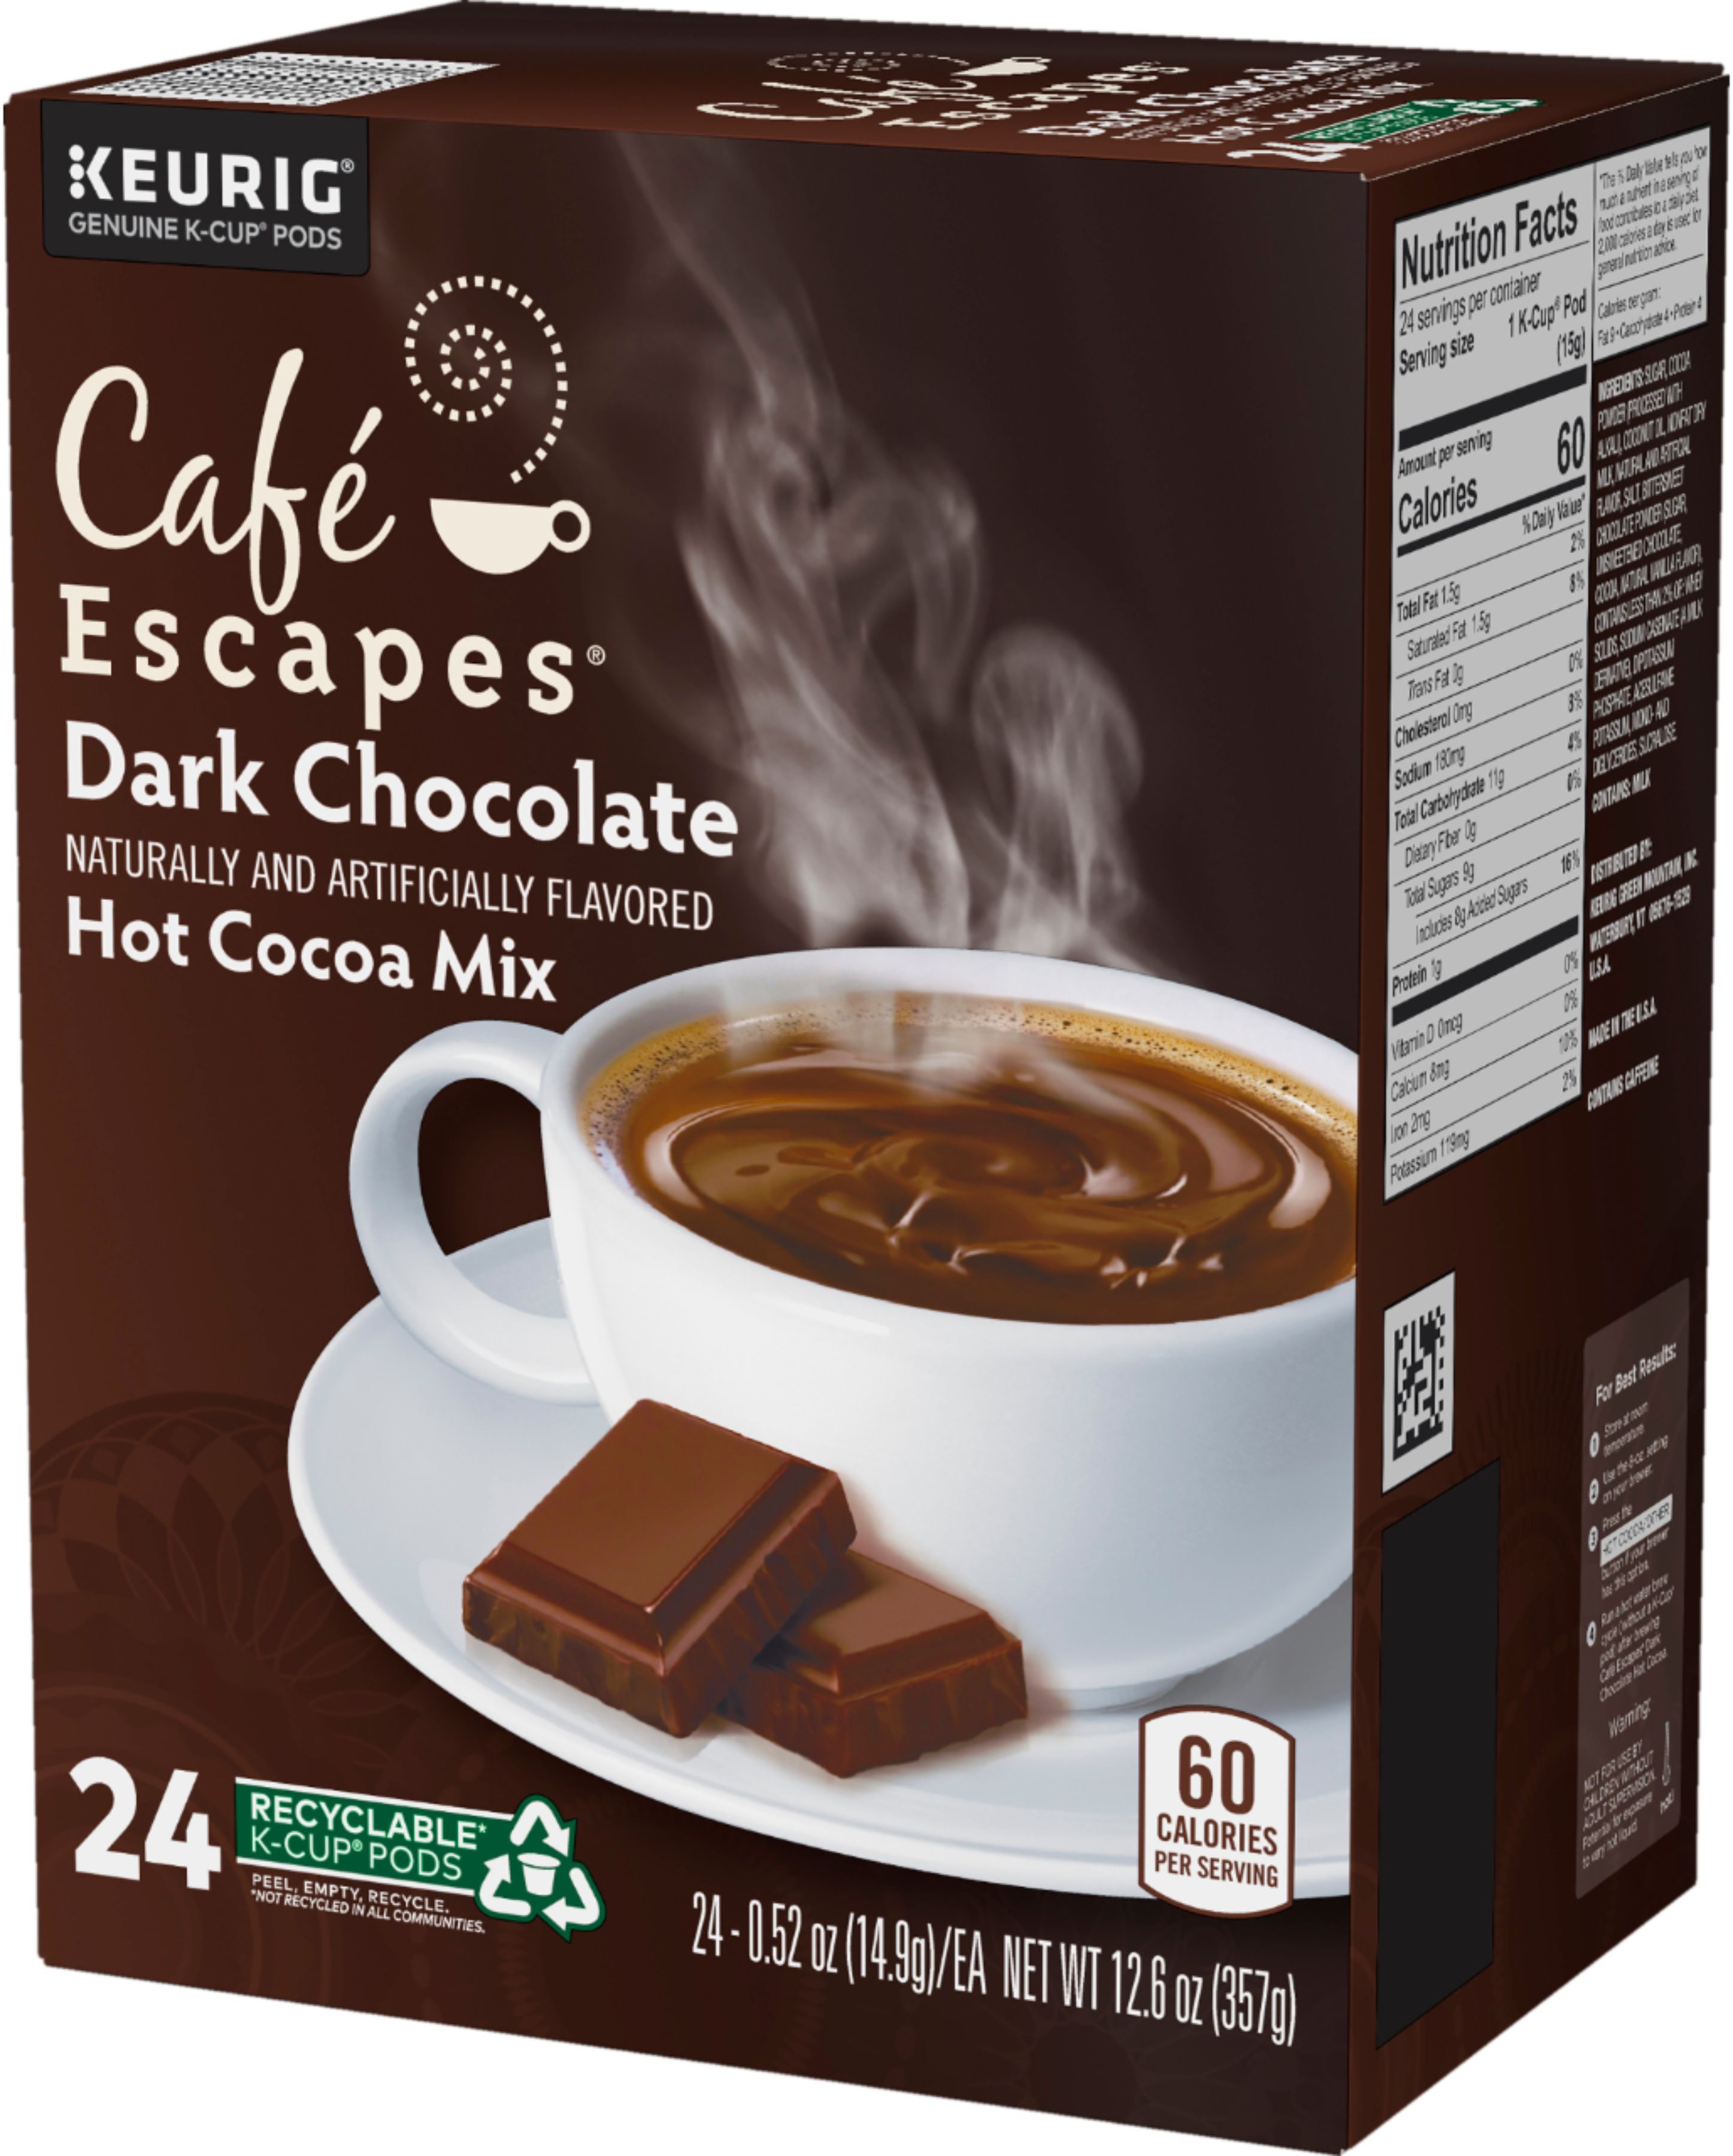 Cafe Escapes Dark Chocolate Hot Cocoa K-cups - 24 count